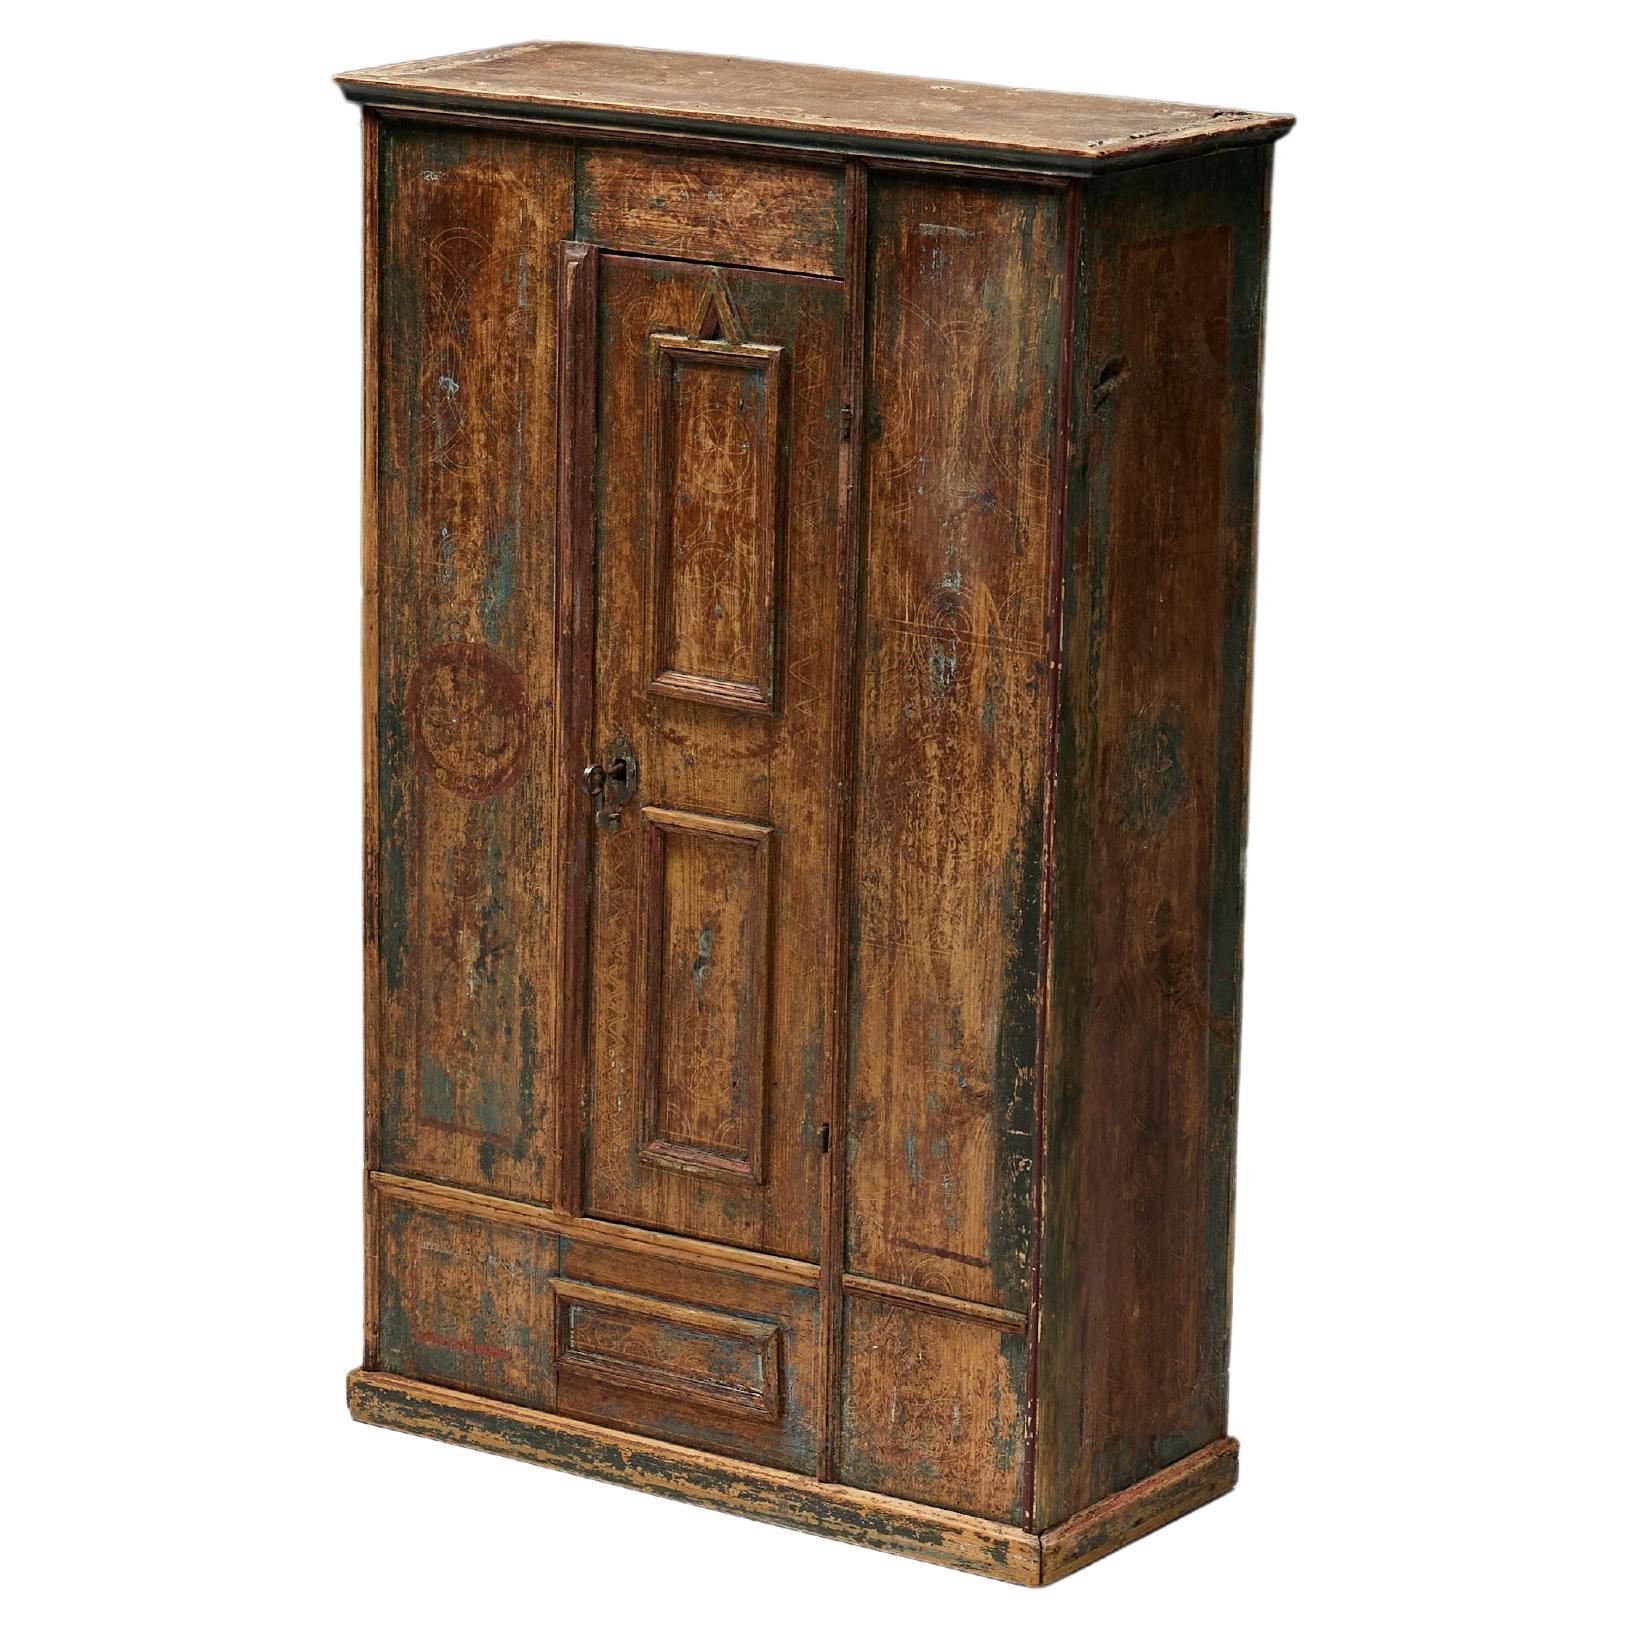 Rustic Travail Populaire Cabinet, France, 18th Century